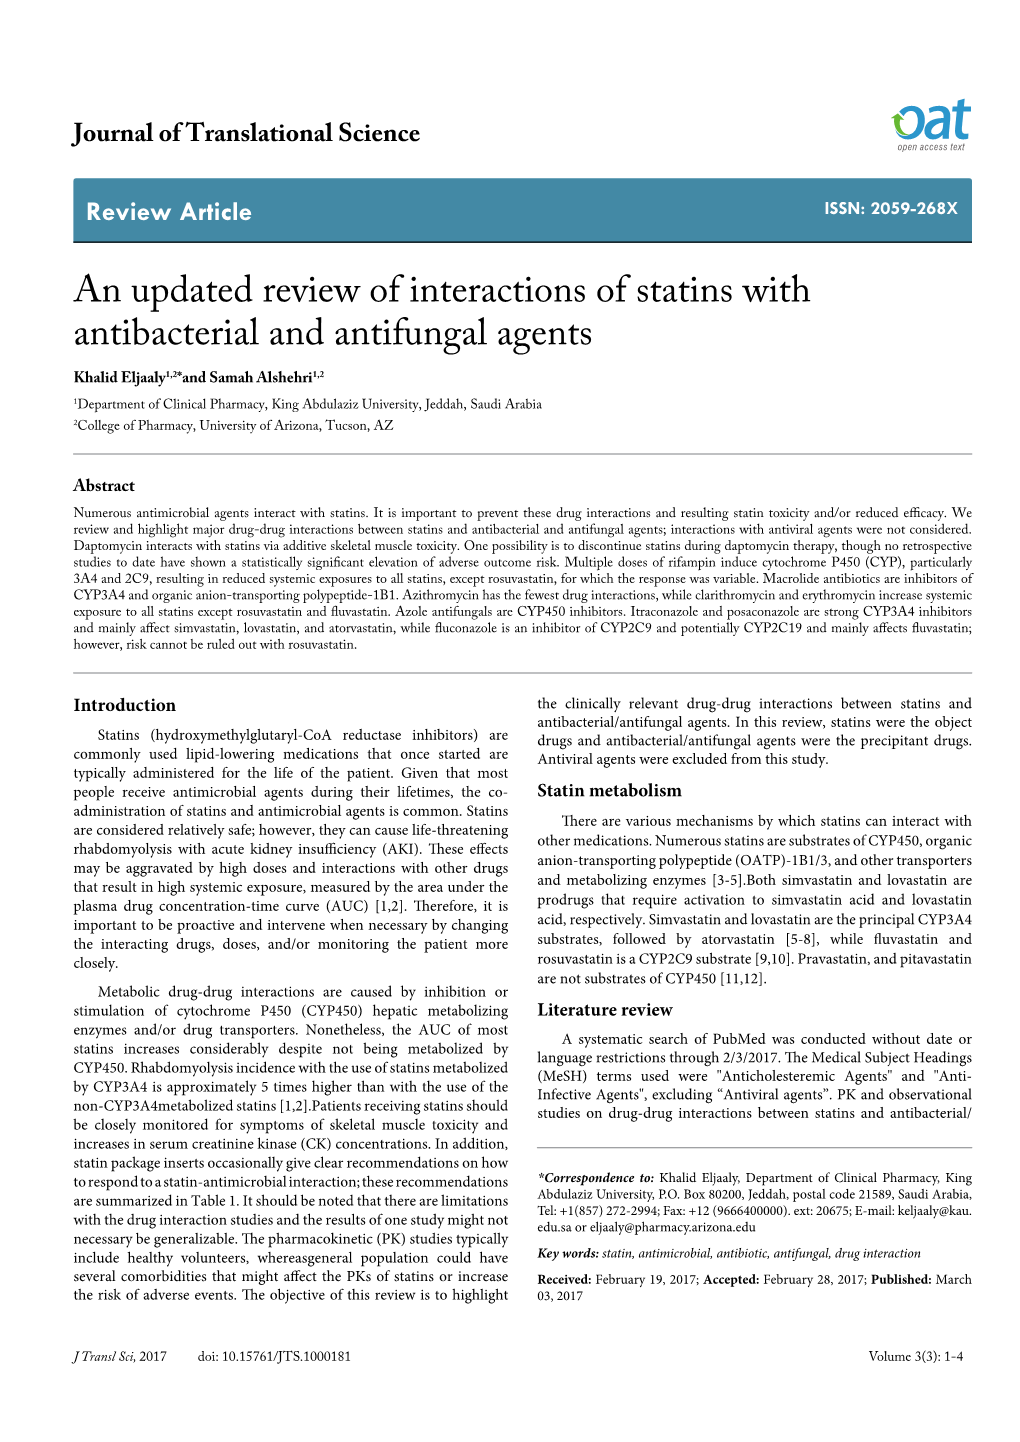 An Updated Review of Interactions of Statins with Antibacterial and Antifungal Agents